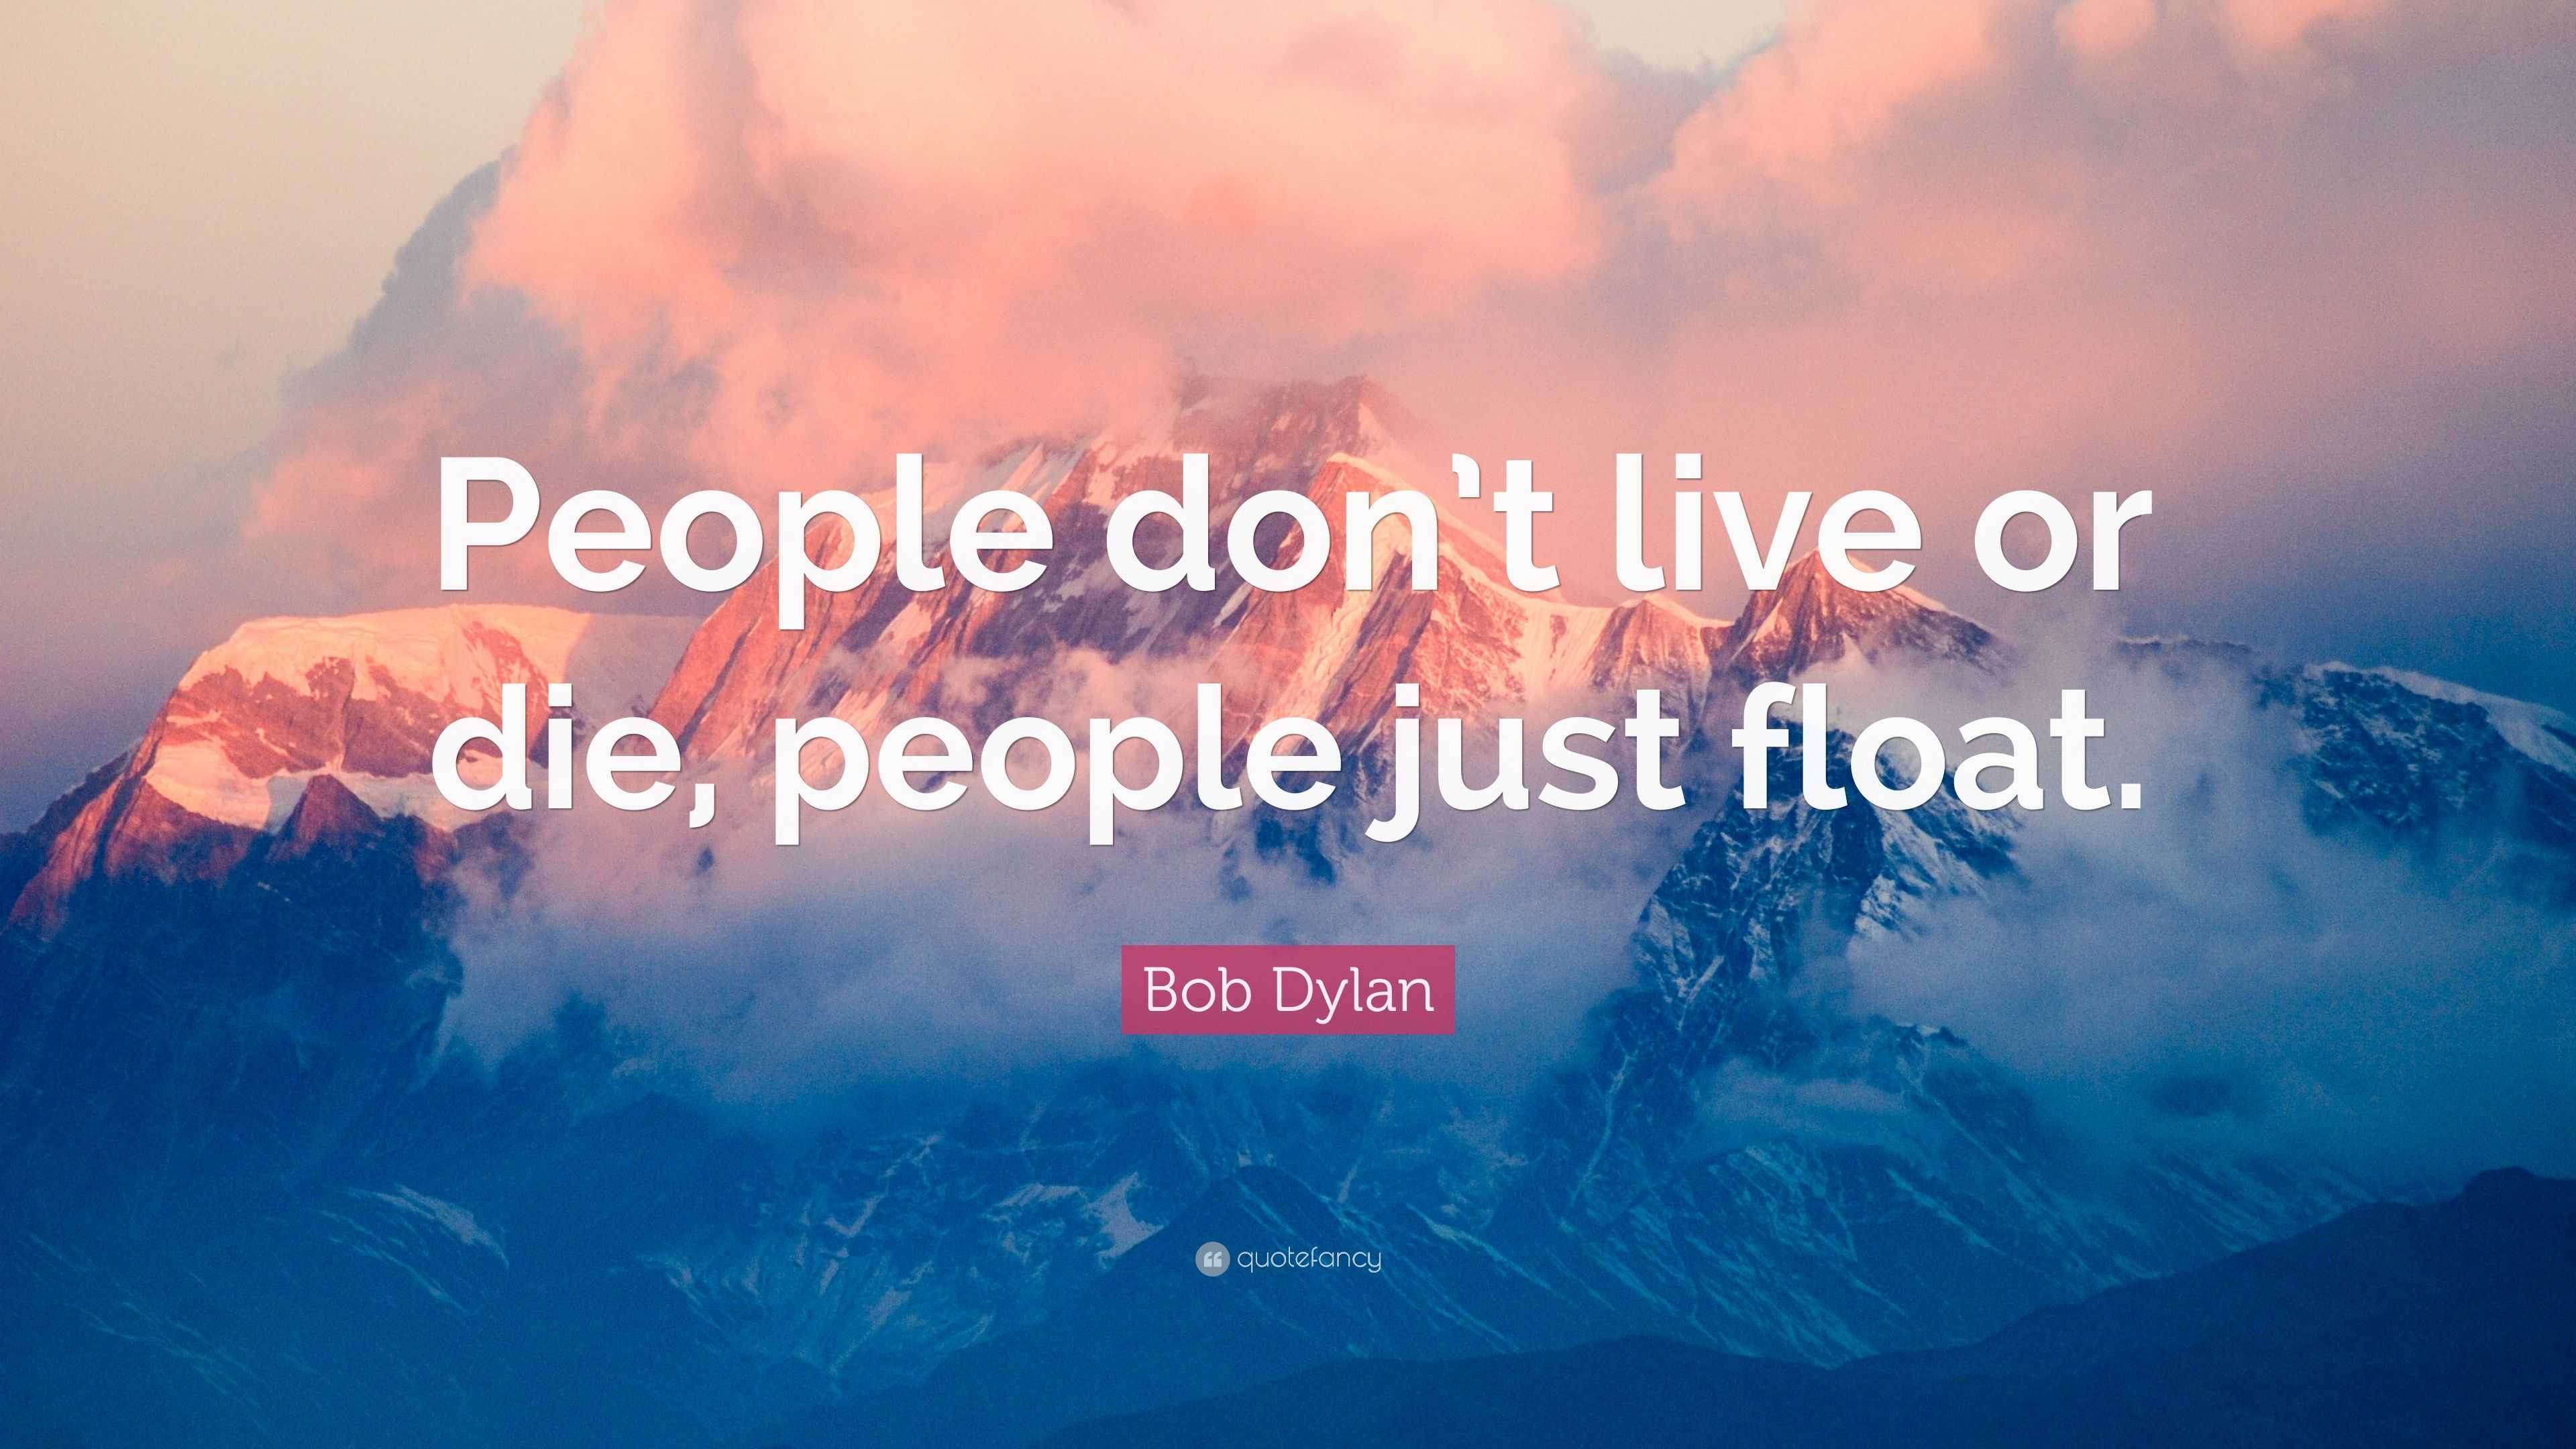 Bob Dylan Quote: “People don't live or die, people just float.”